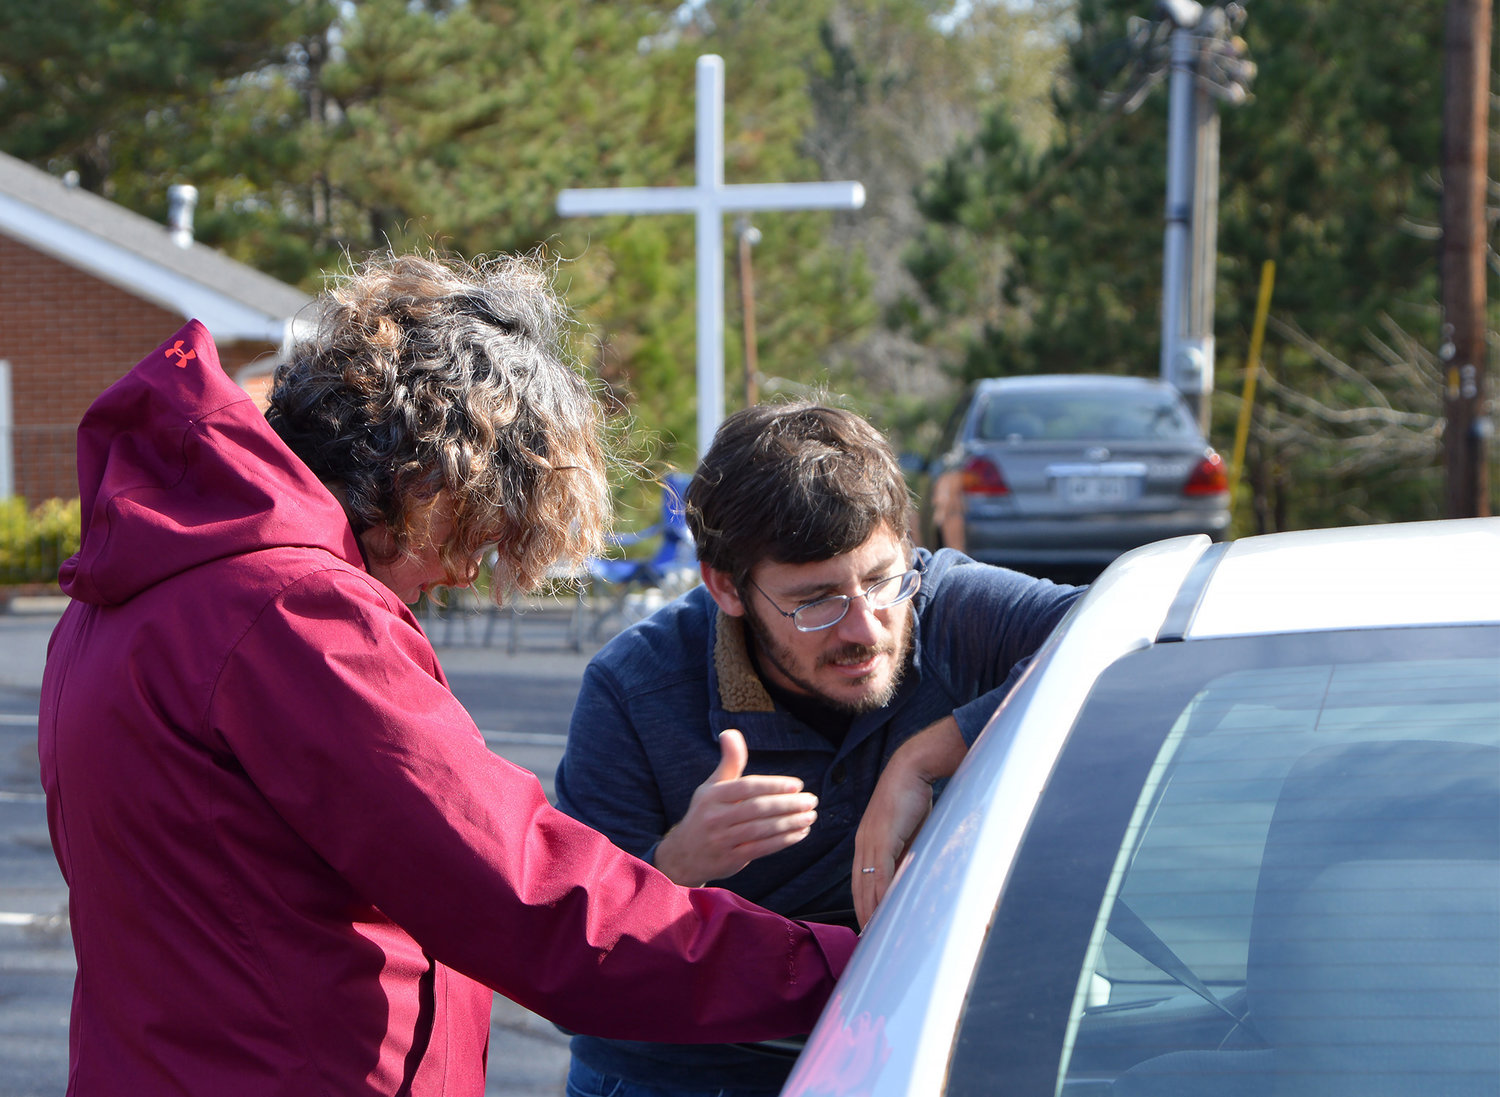 Pastor Jamie Hobbs and Debbie Lloyd, left, pray for a driver who pulled into New Hope First Baptist Church on Saturday, Nov. 19, 2022, in Dallas, Ga. (Index/Henry Durand)